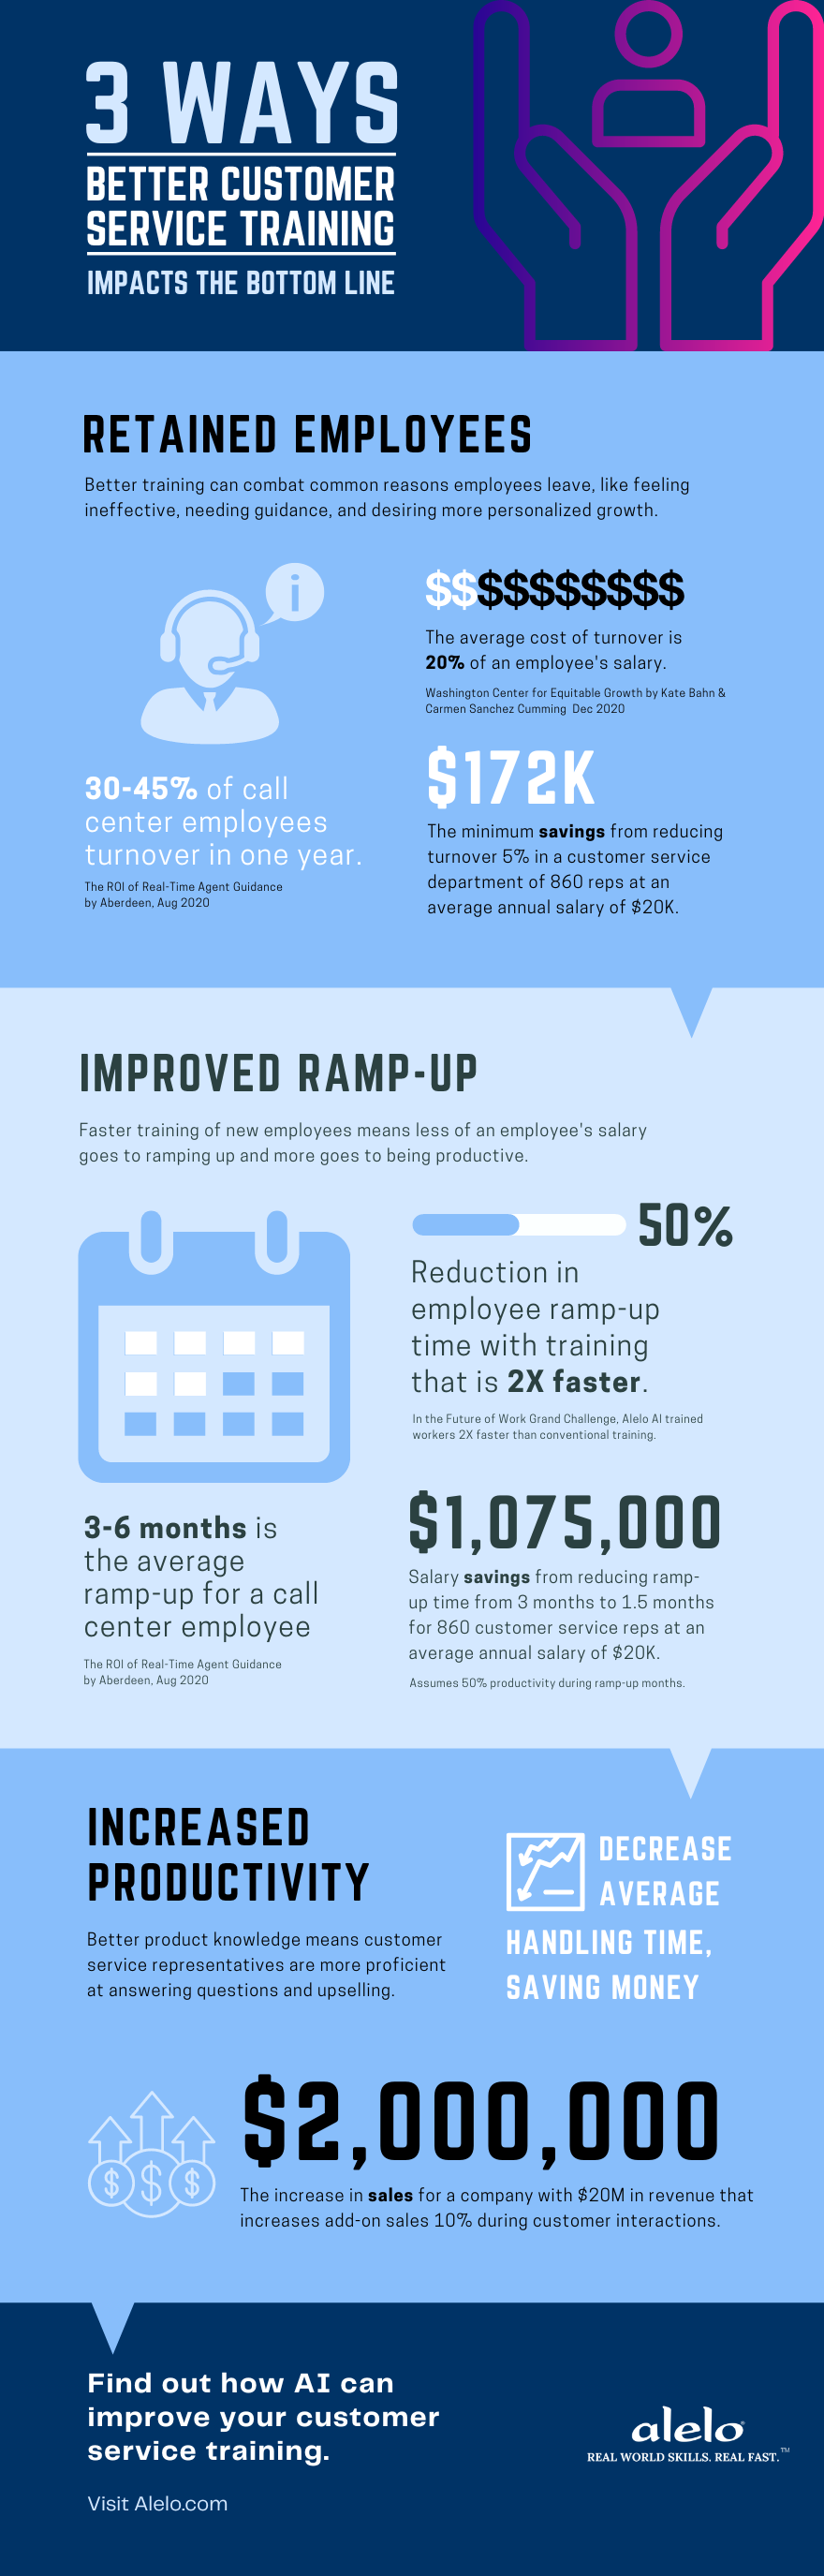 Infographic: 3 Ways Better Customer Service Training Impacts the Bottom Line